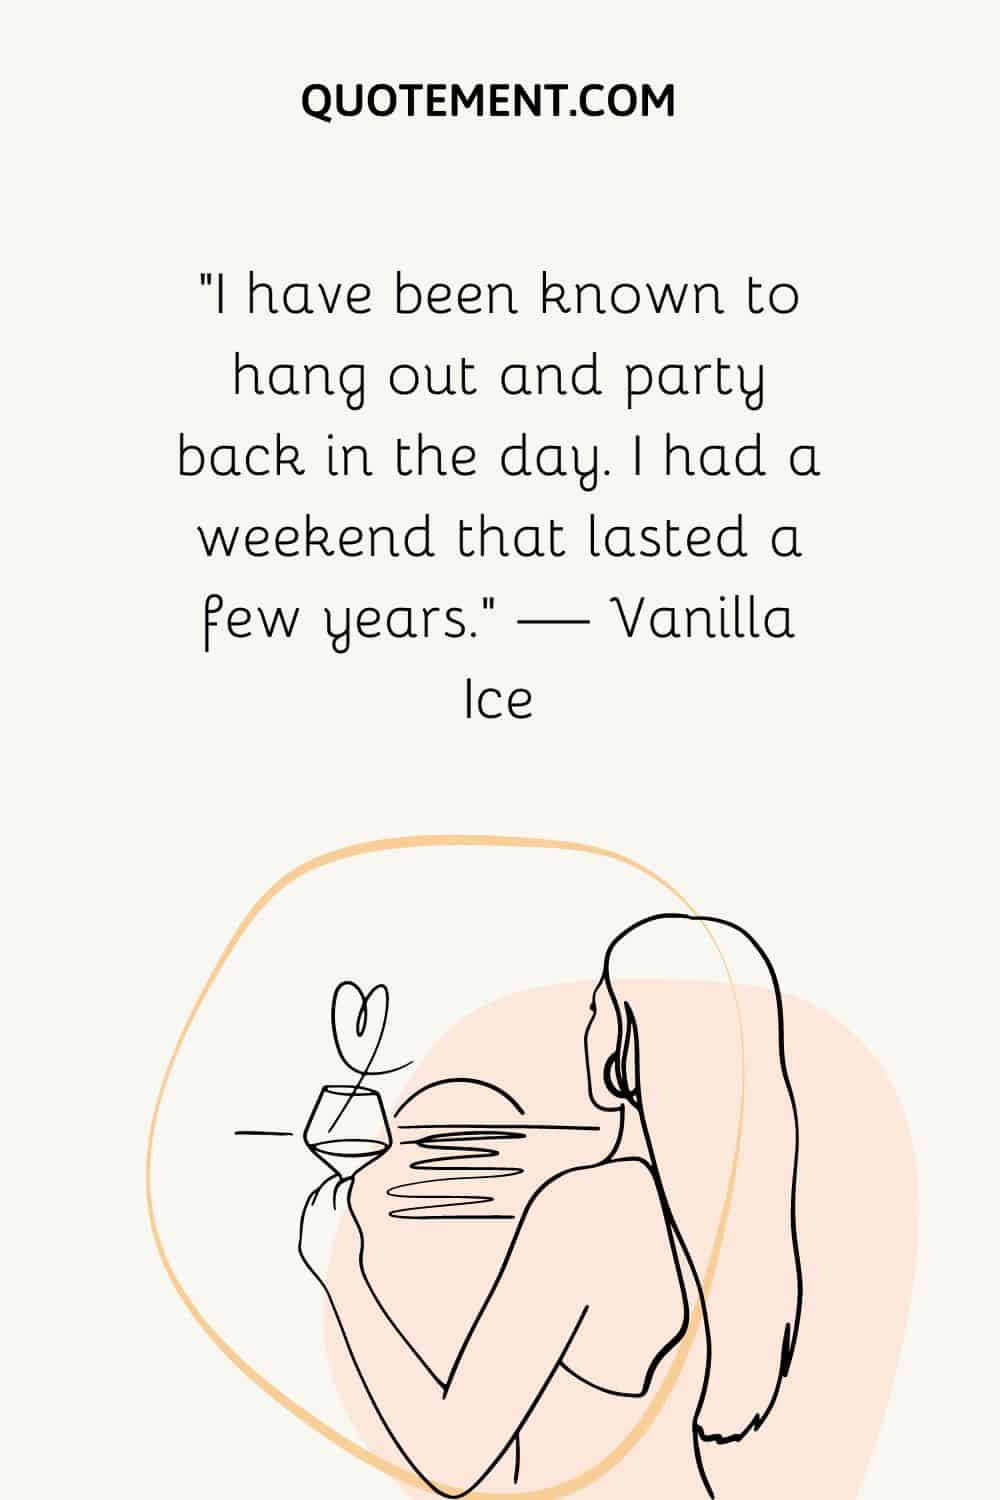 “I have been known to hang out and party back in the day. I had a weekend that lasted a few years.” — Vanilla Ice